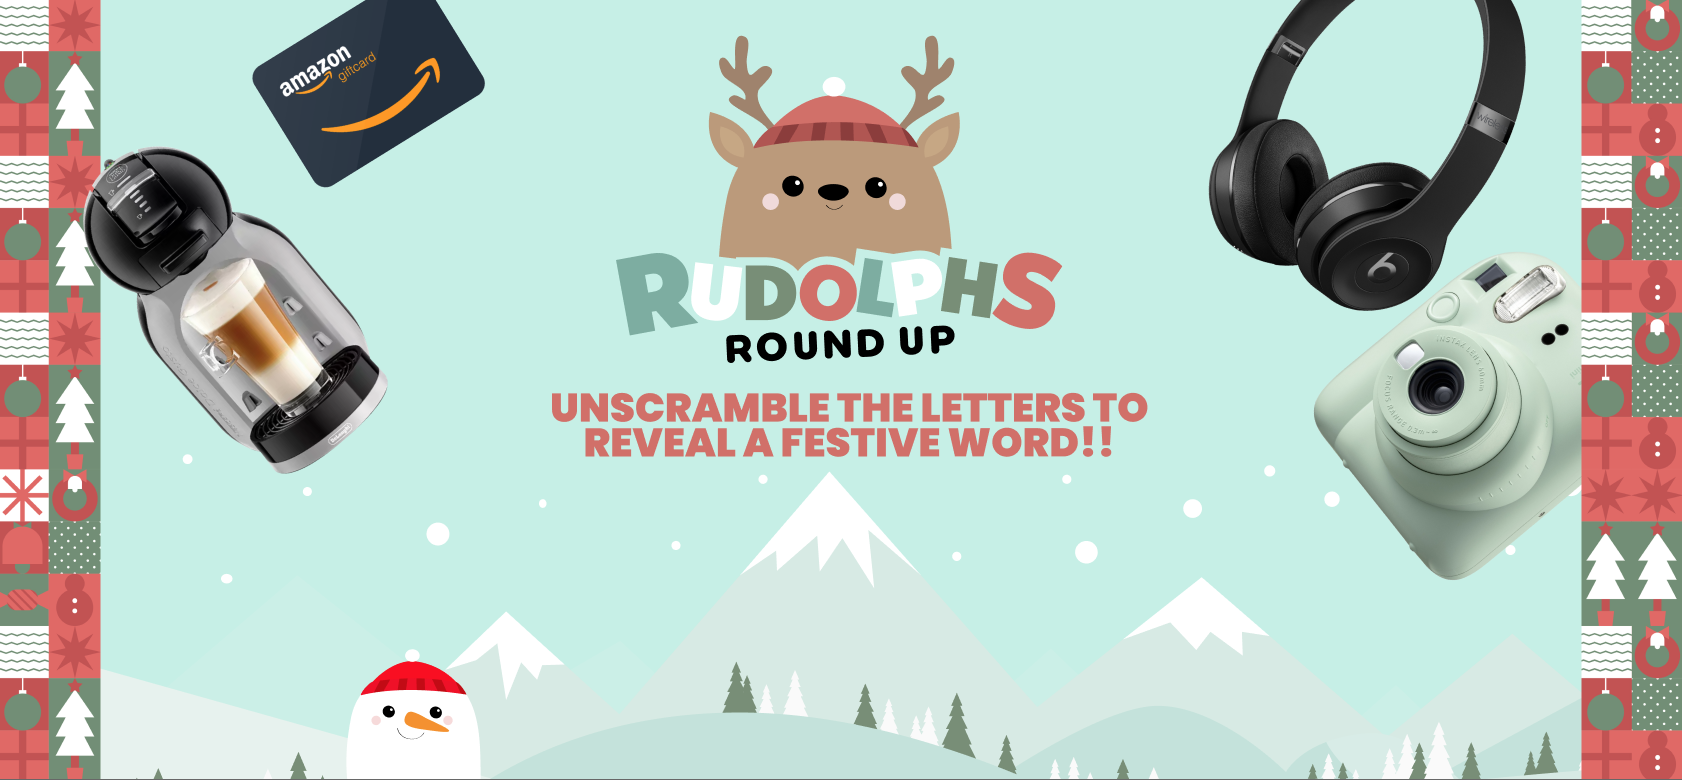 Rudolphs Round Up - Christmas Competition